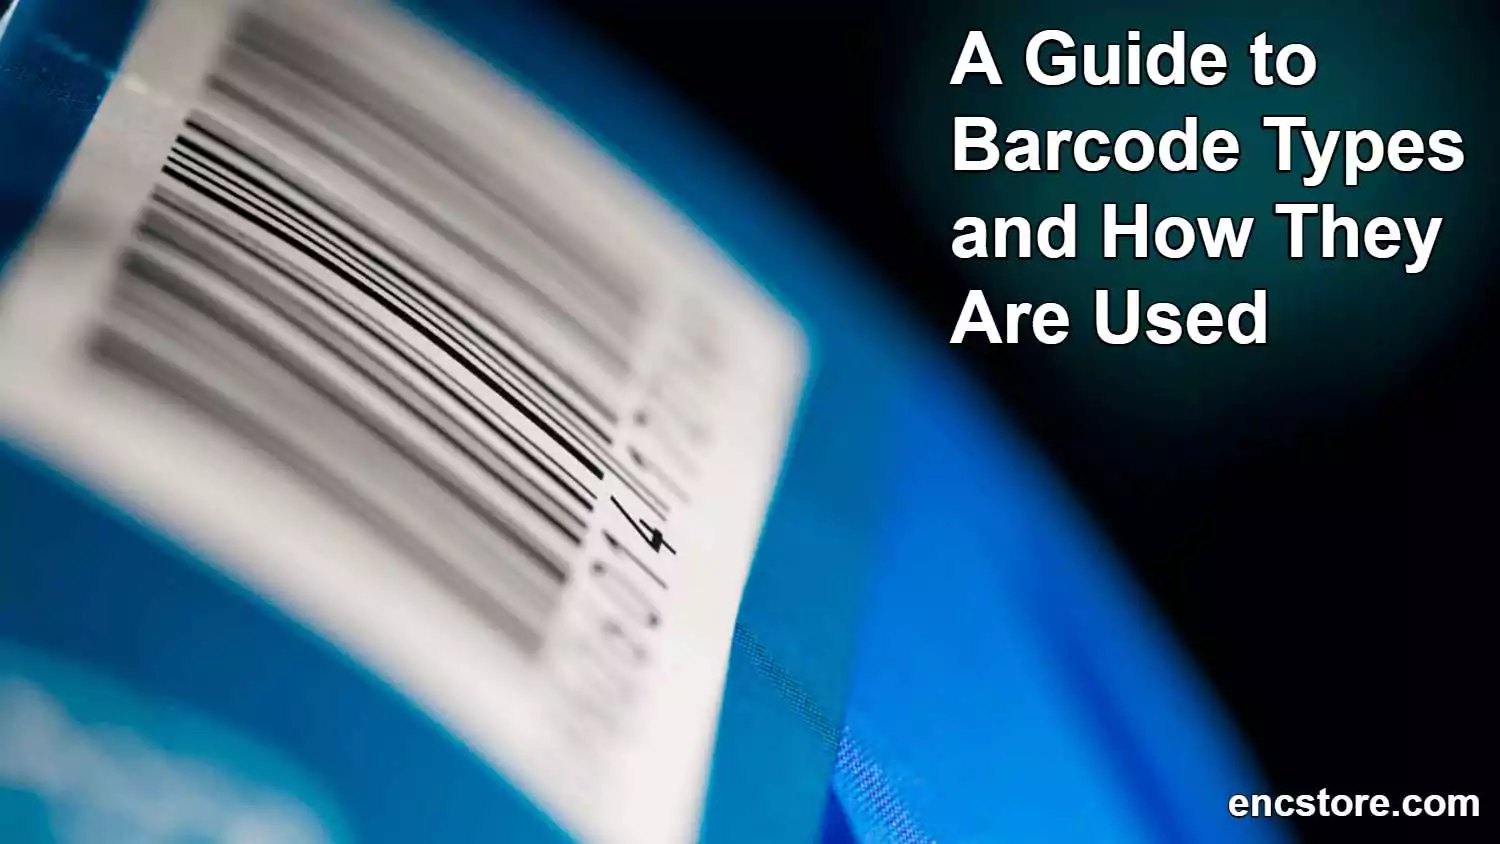 A Guide to Barcode Types and How They Are Used